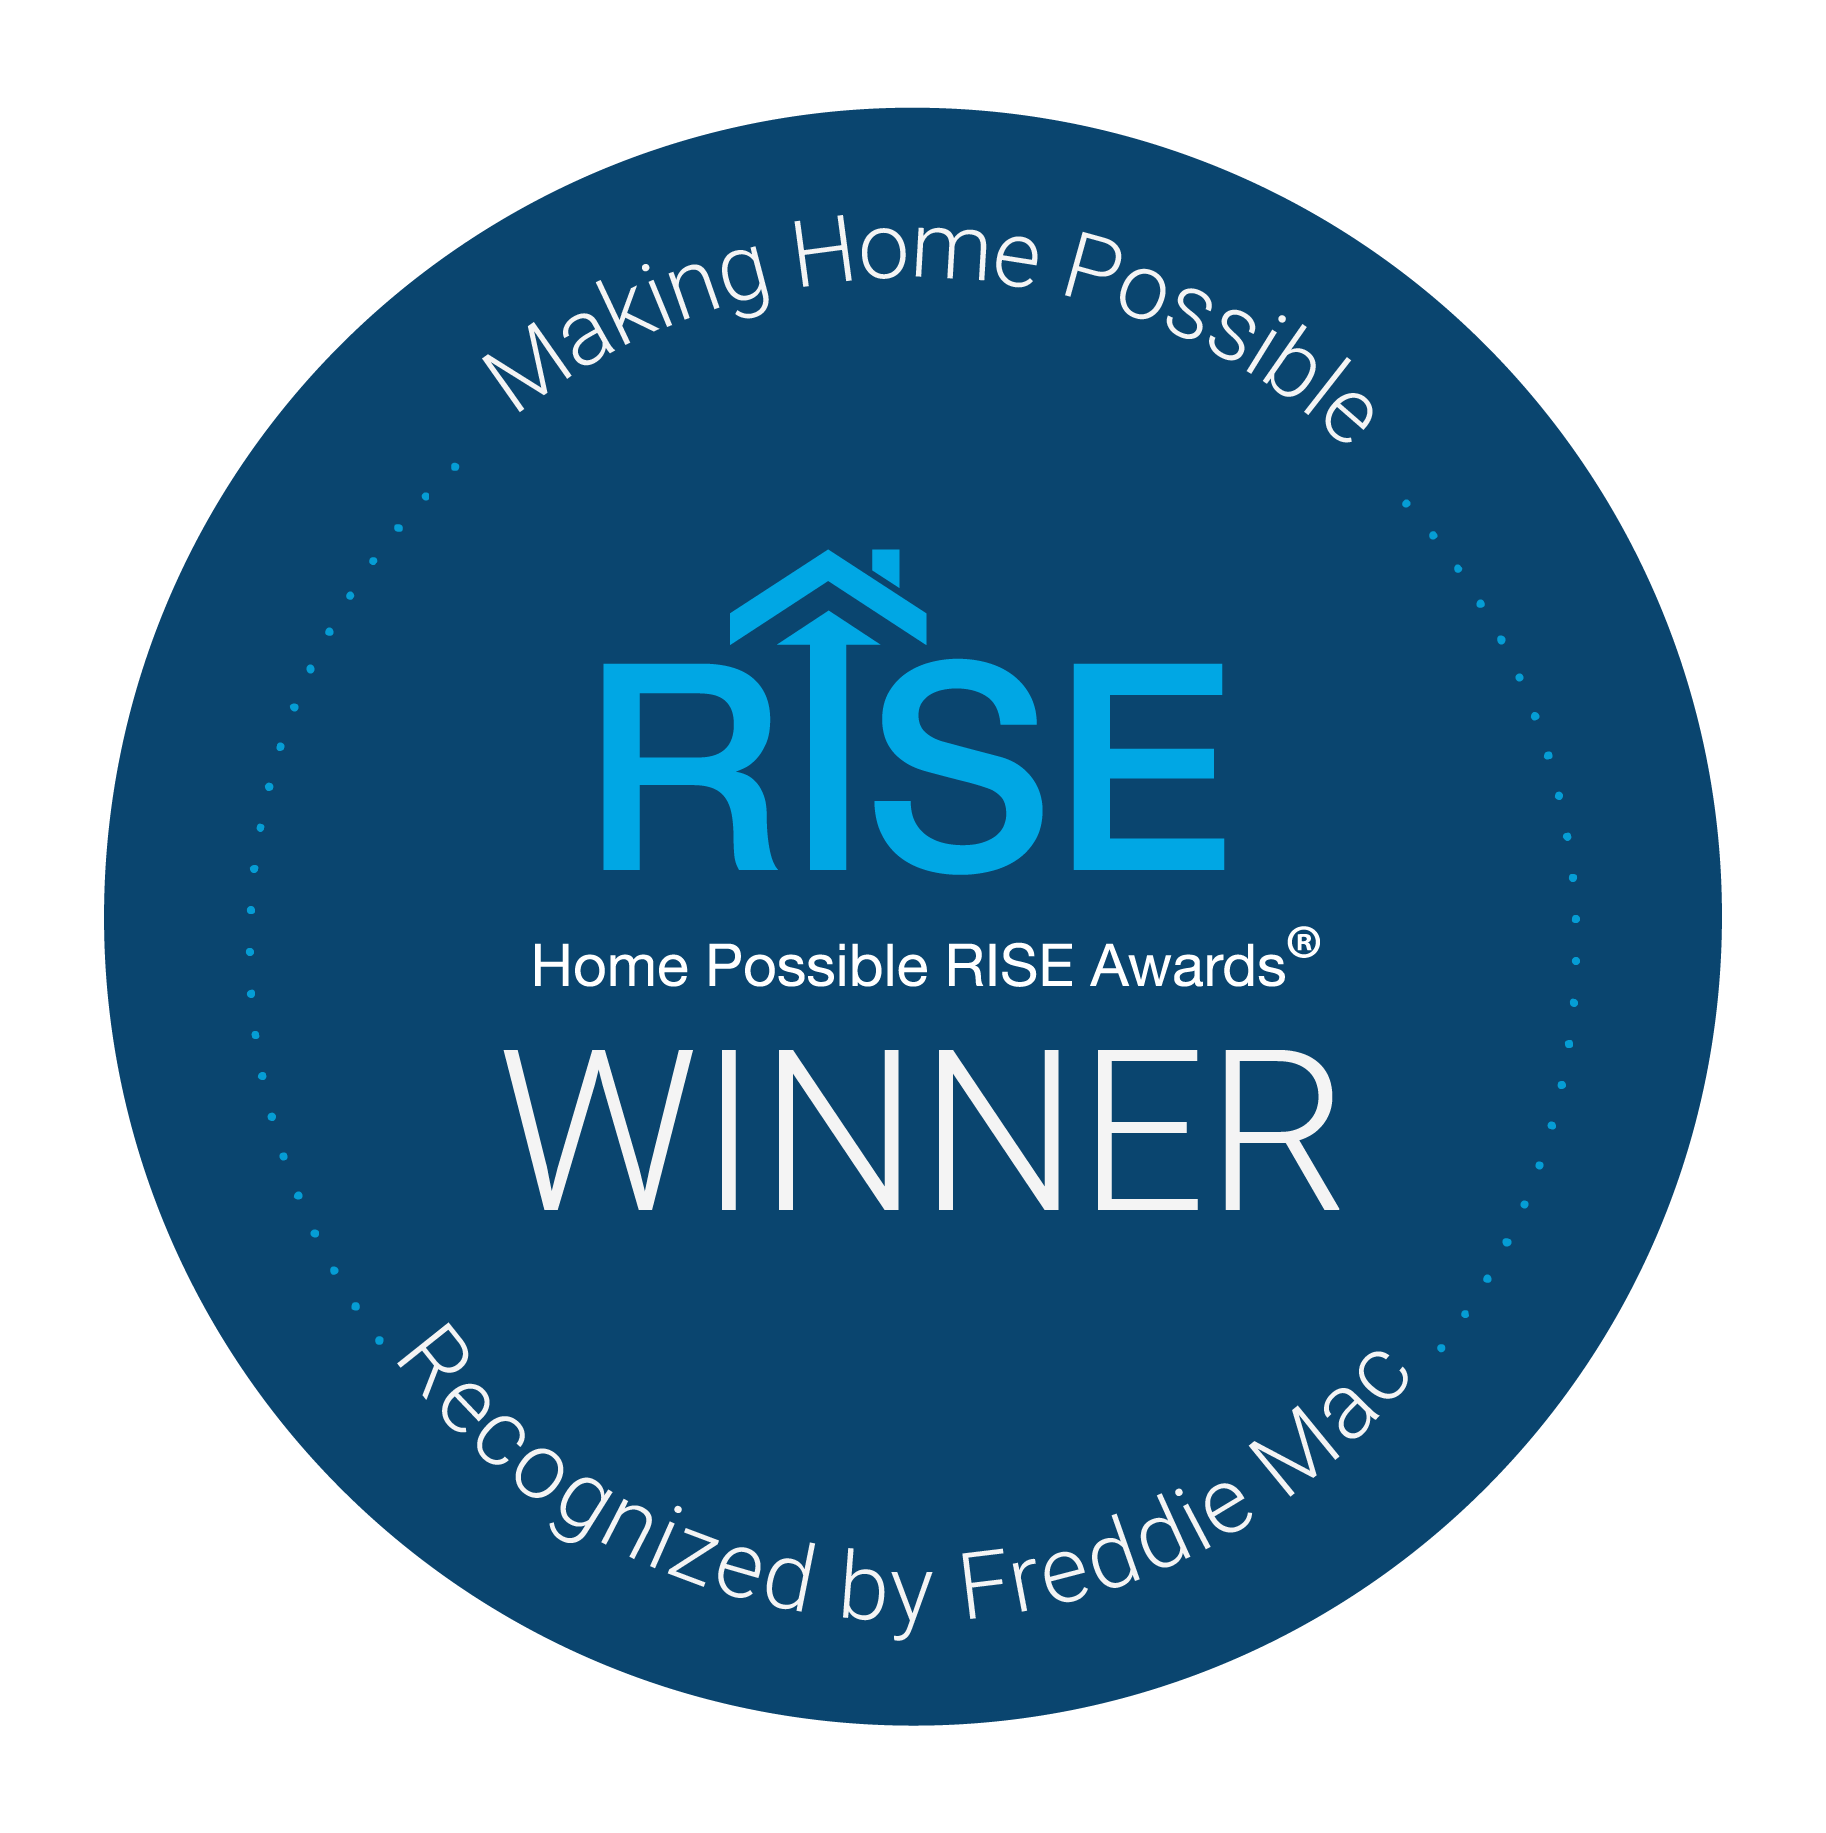 Home Possible RISE Award®